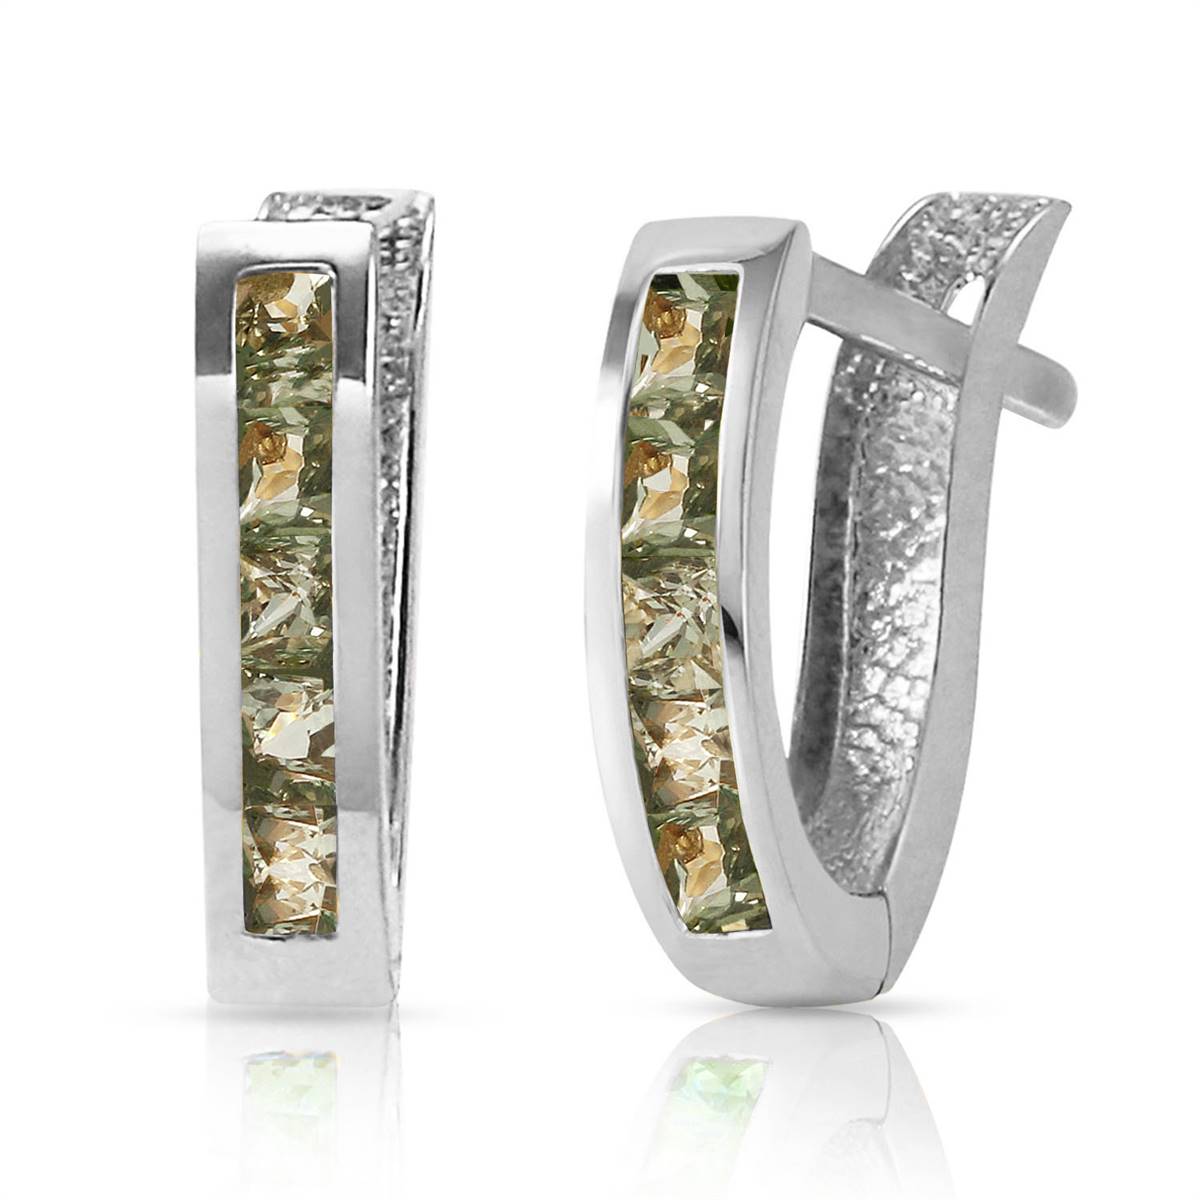 1.3 Carat 14K Solid White Gold Huggie Earrings Green Natural Sapphire